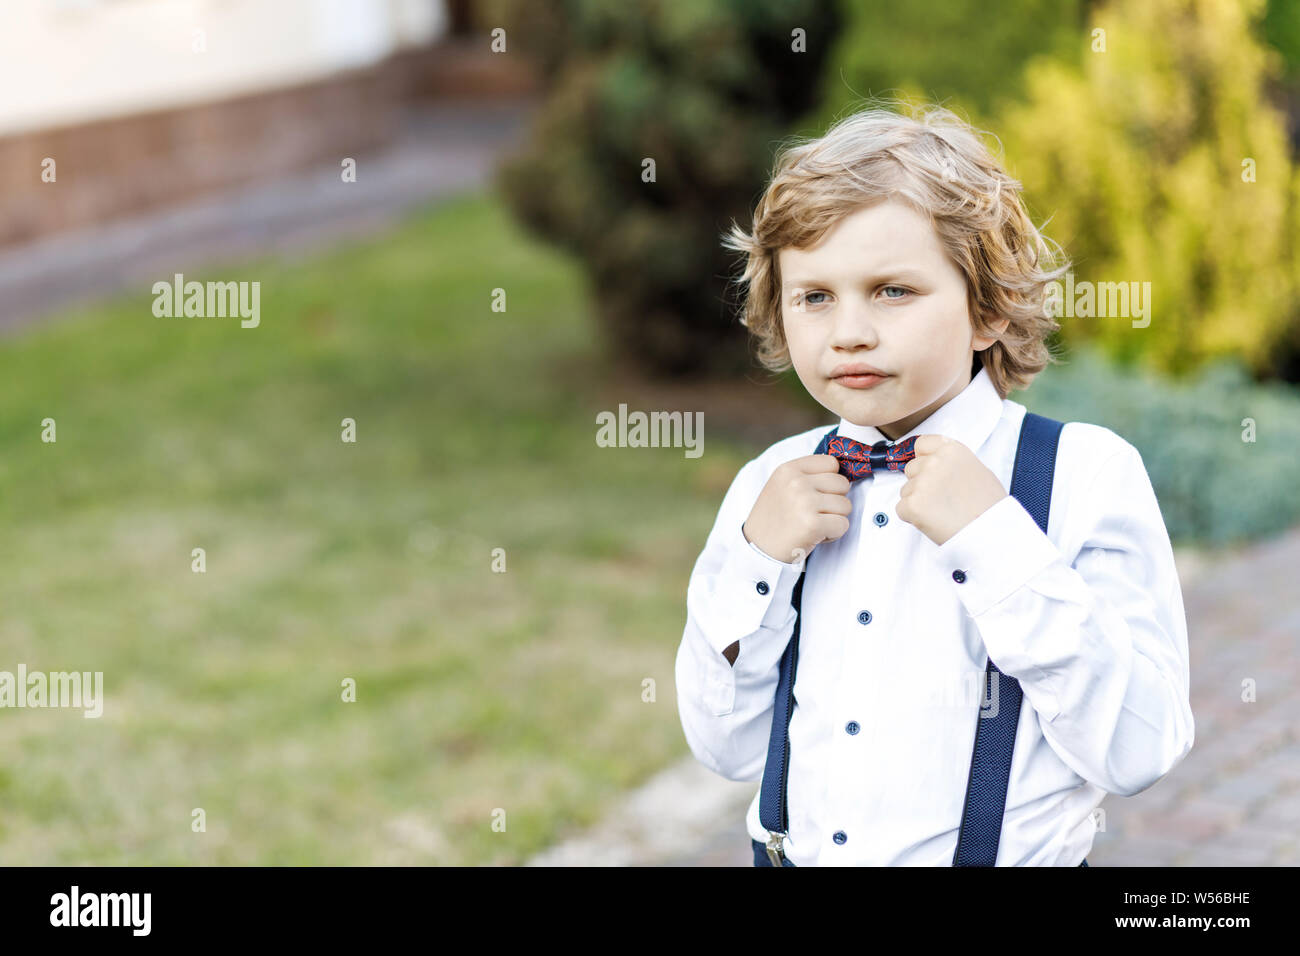 Cute blond guy, school year, dressed in school uniform, takes her time outdoors in between classes Stock Photo